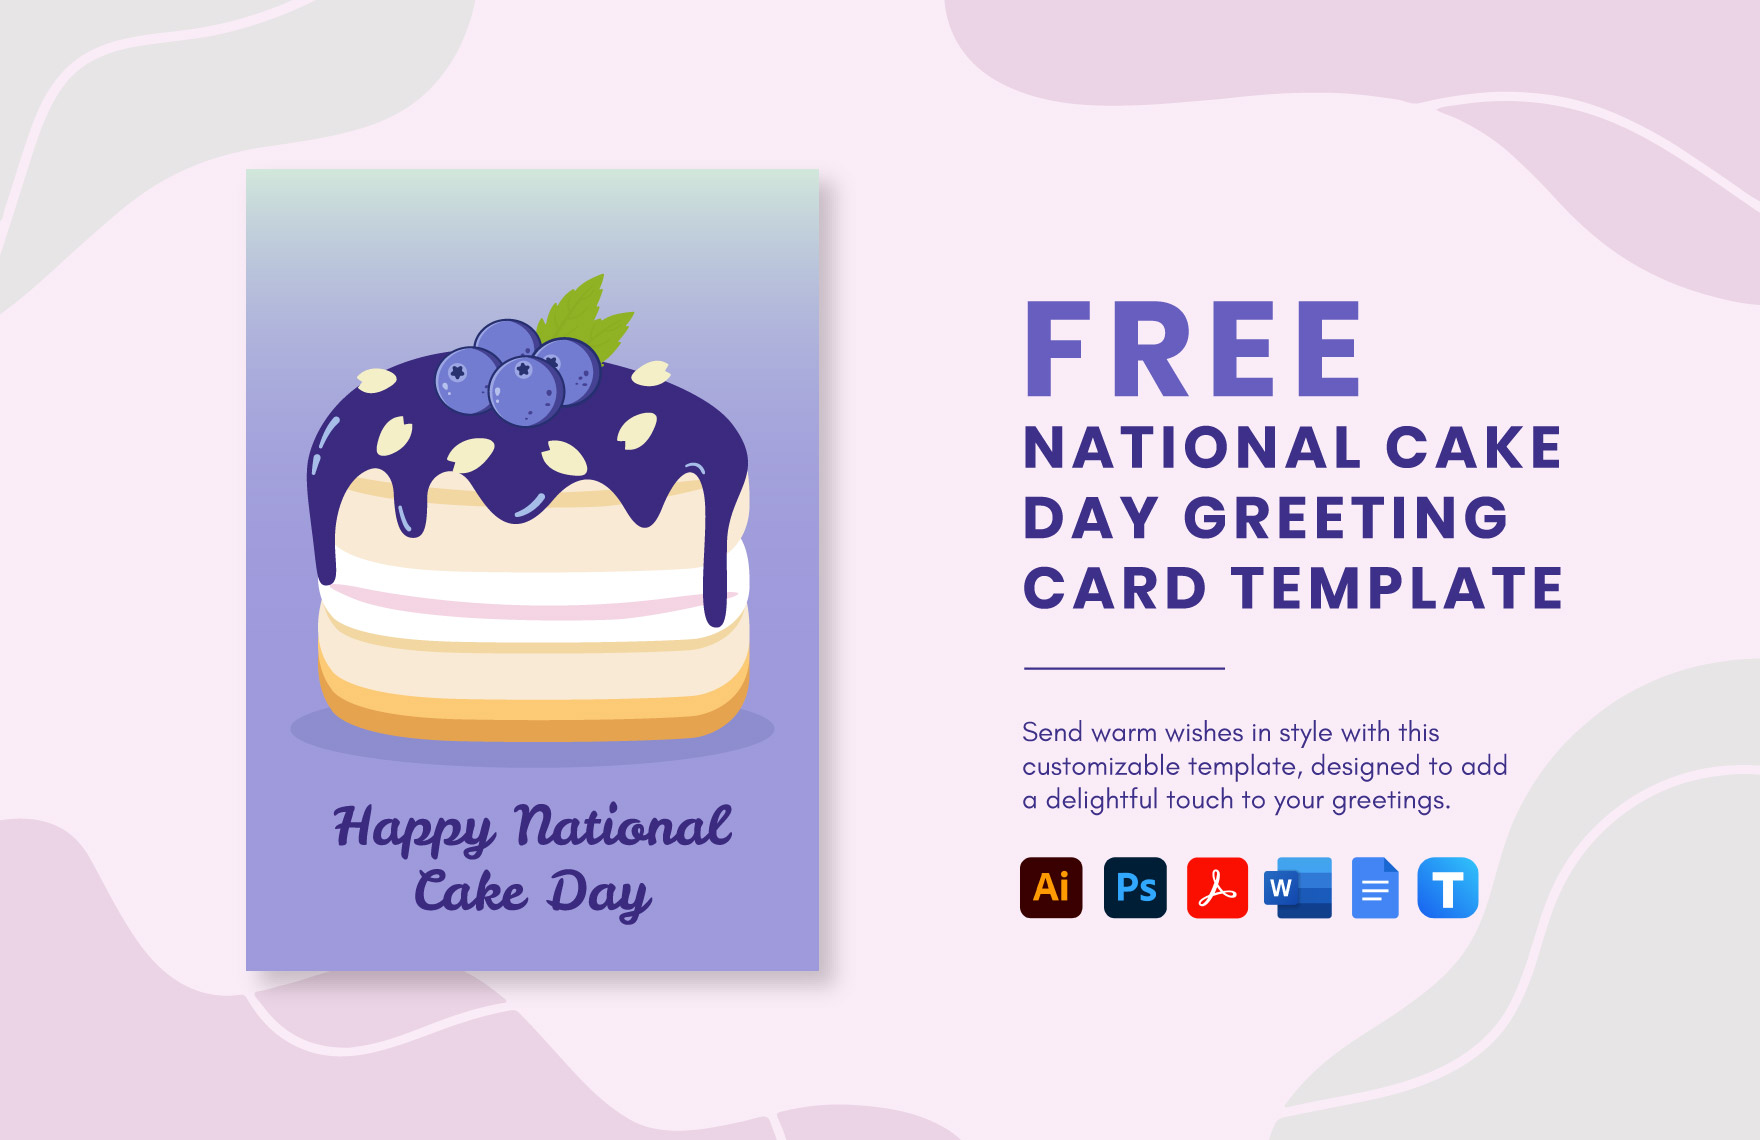 National Cake Day Greeting Card Template